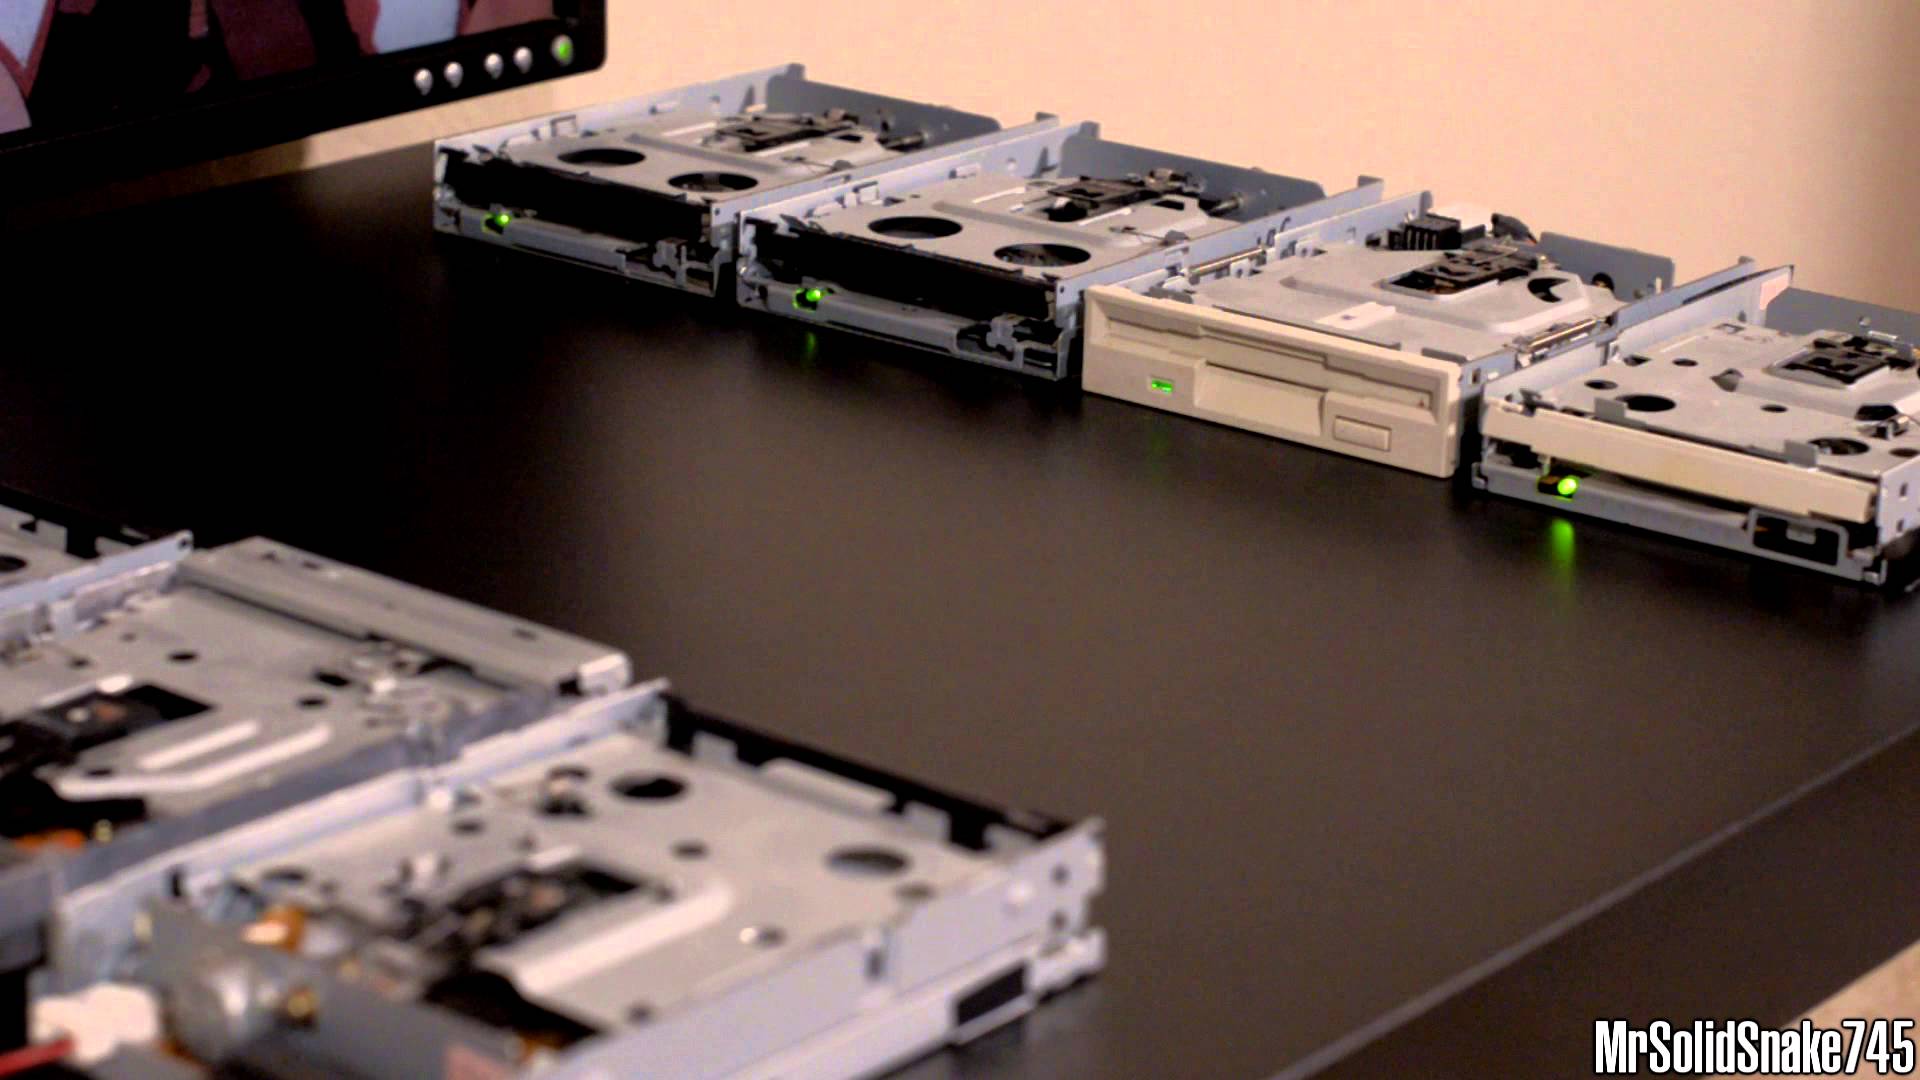 The Song 'Tank!' From the Japanese Anime 'Cowboy Bebop' Played on Eight  Floppy Drives and a Digital Keyboard